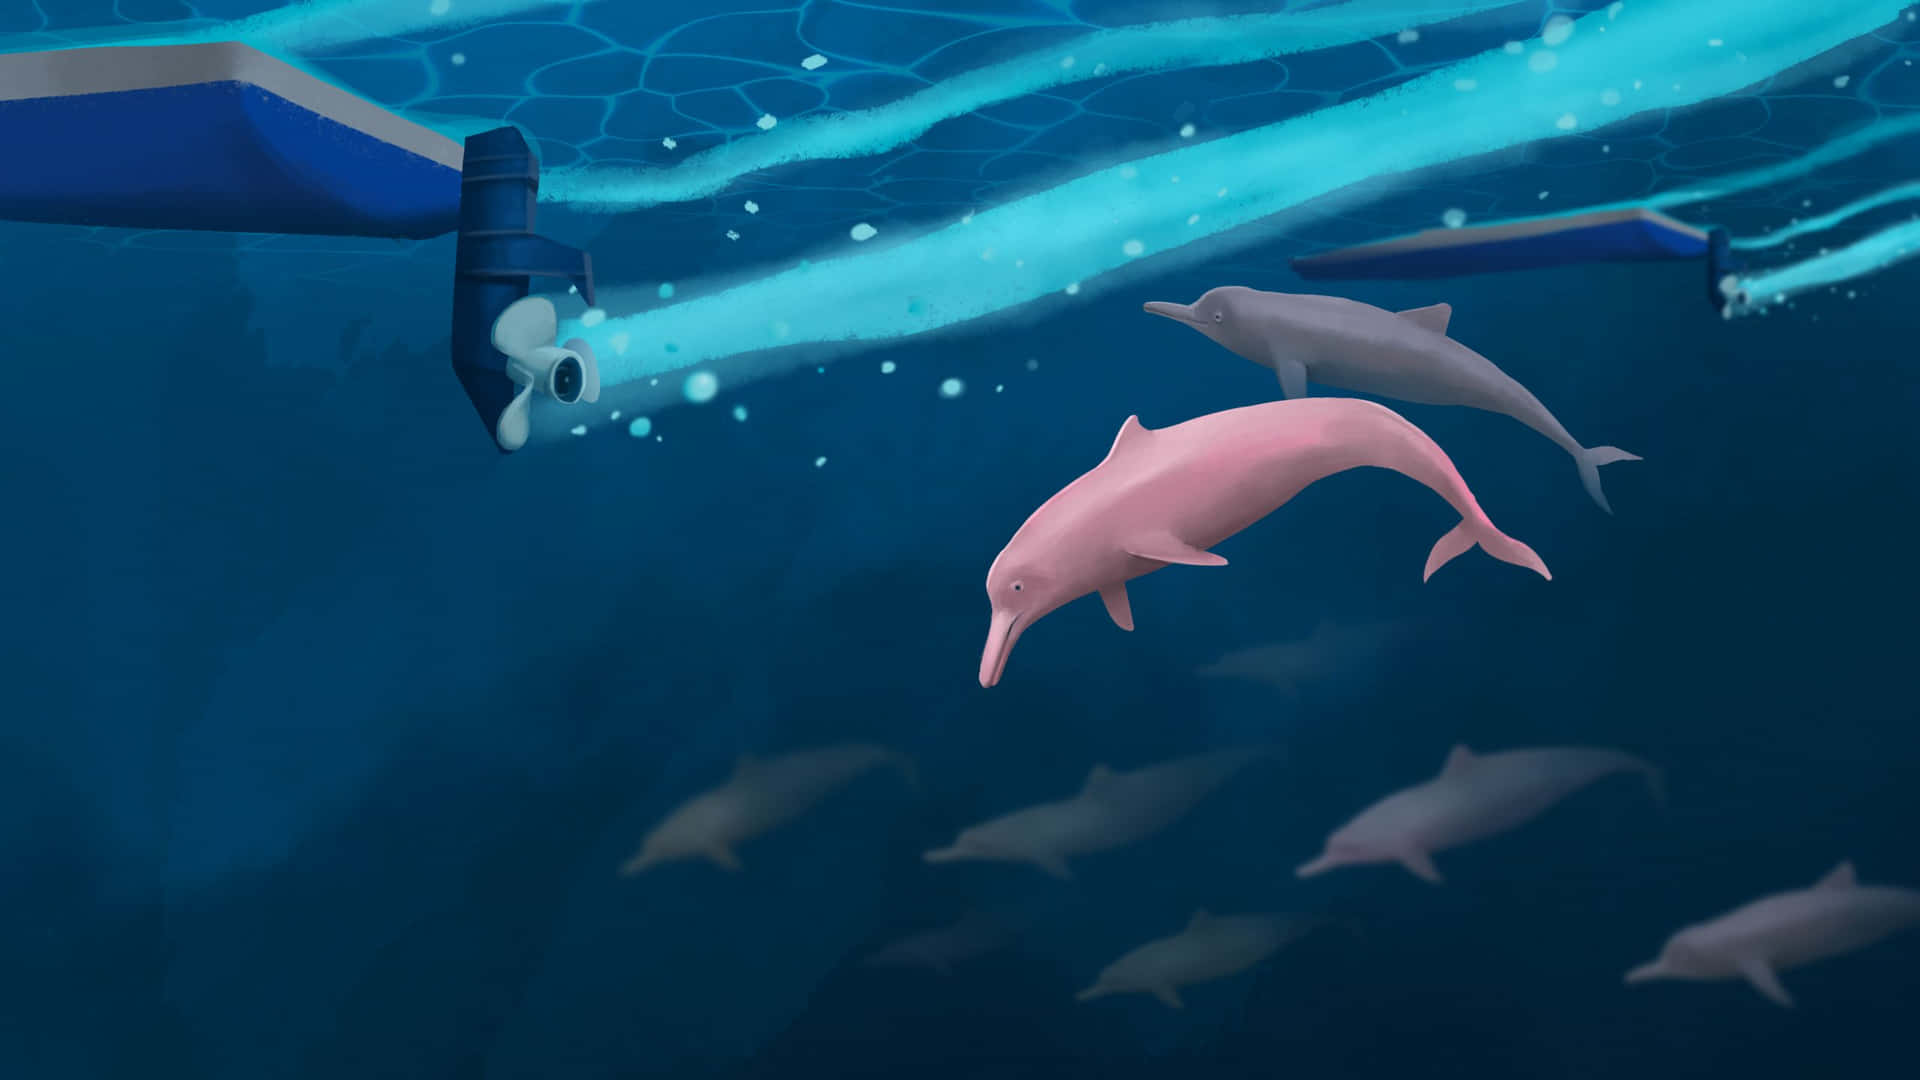 Dolphins Swimming In The Ocean With A Robot Wallpaper